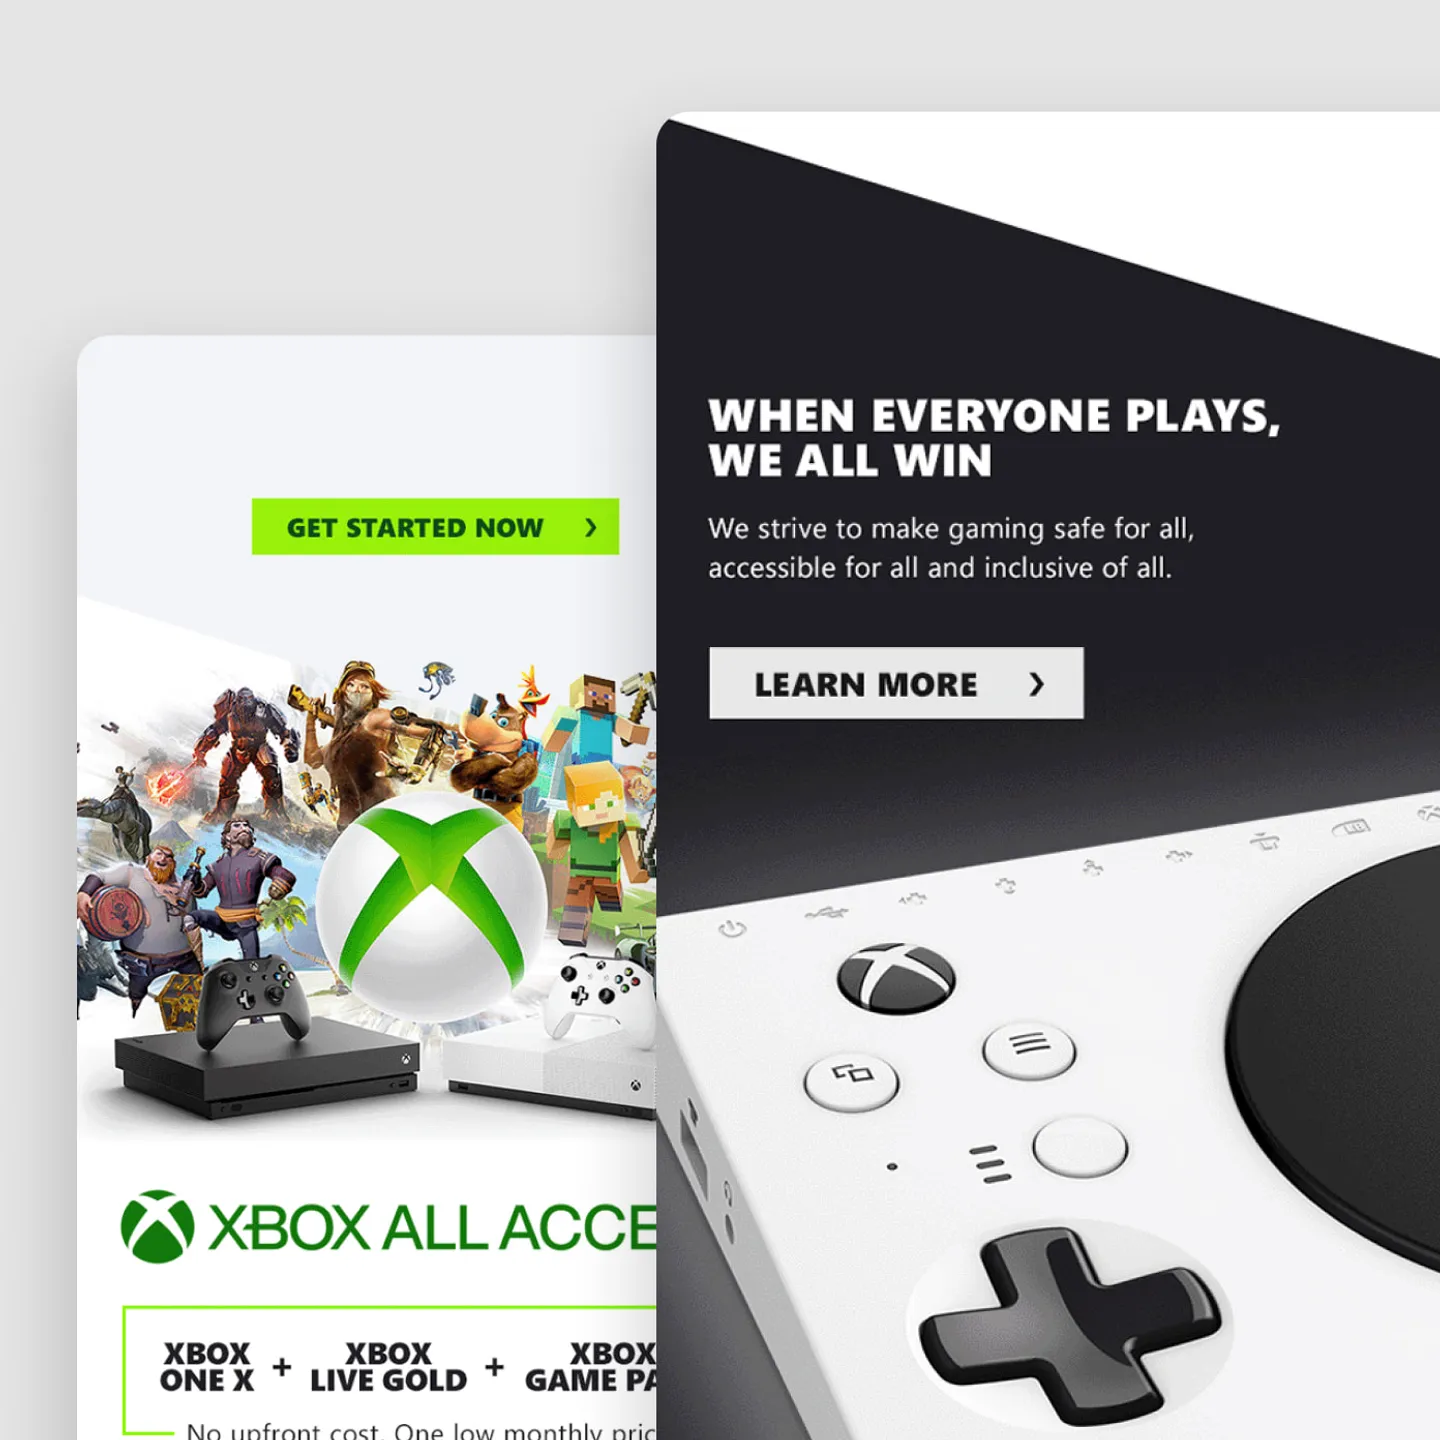 Email designs featuring Xbox products and All Access pass